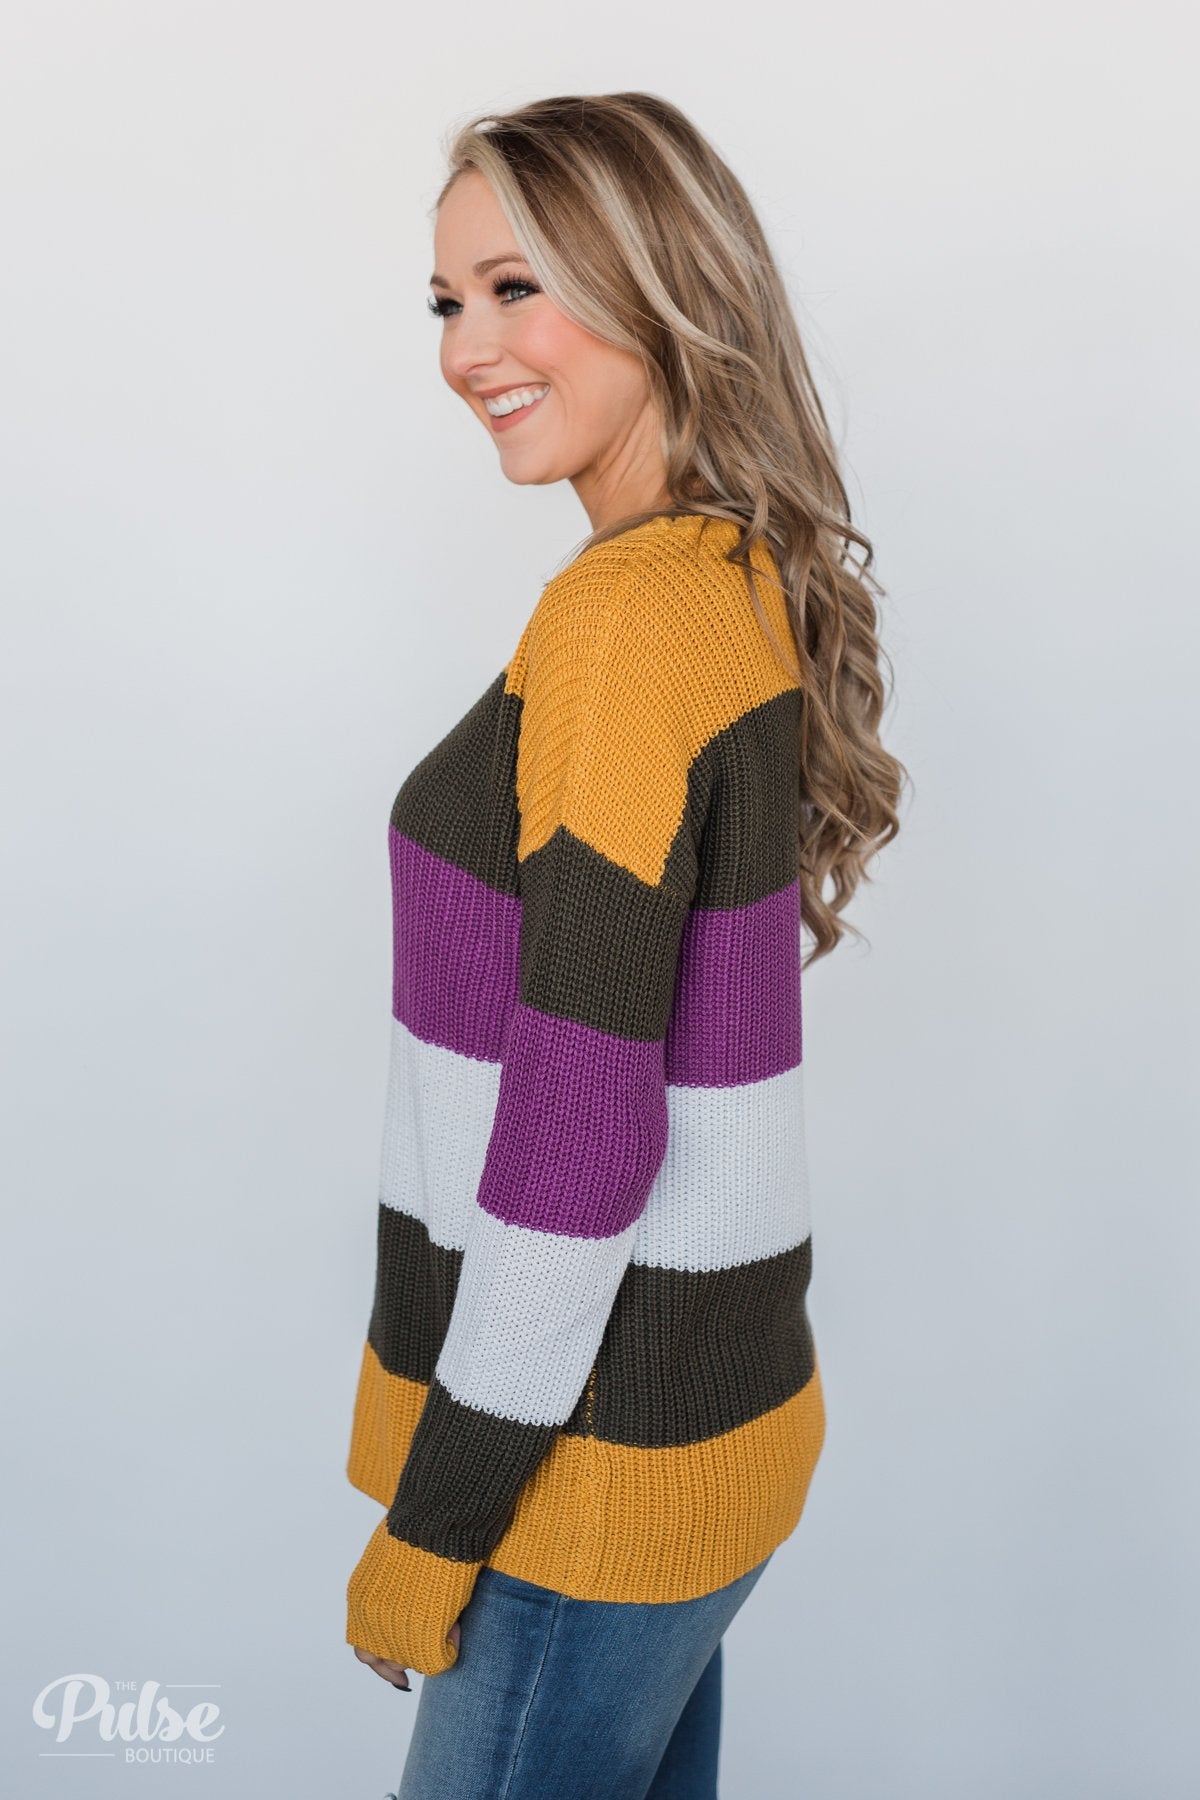 The Way to You Knitted Sweater- Mustard, Olive, & Purple